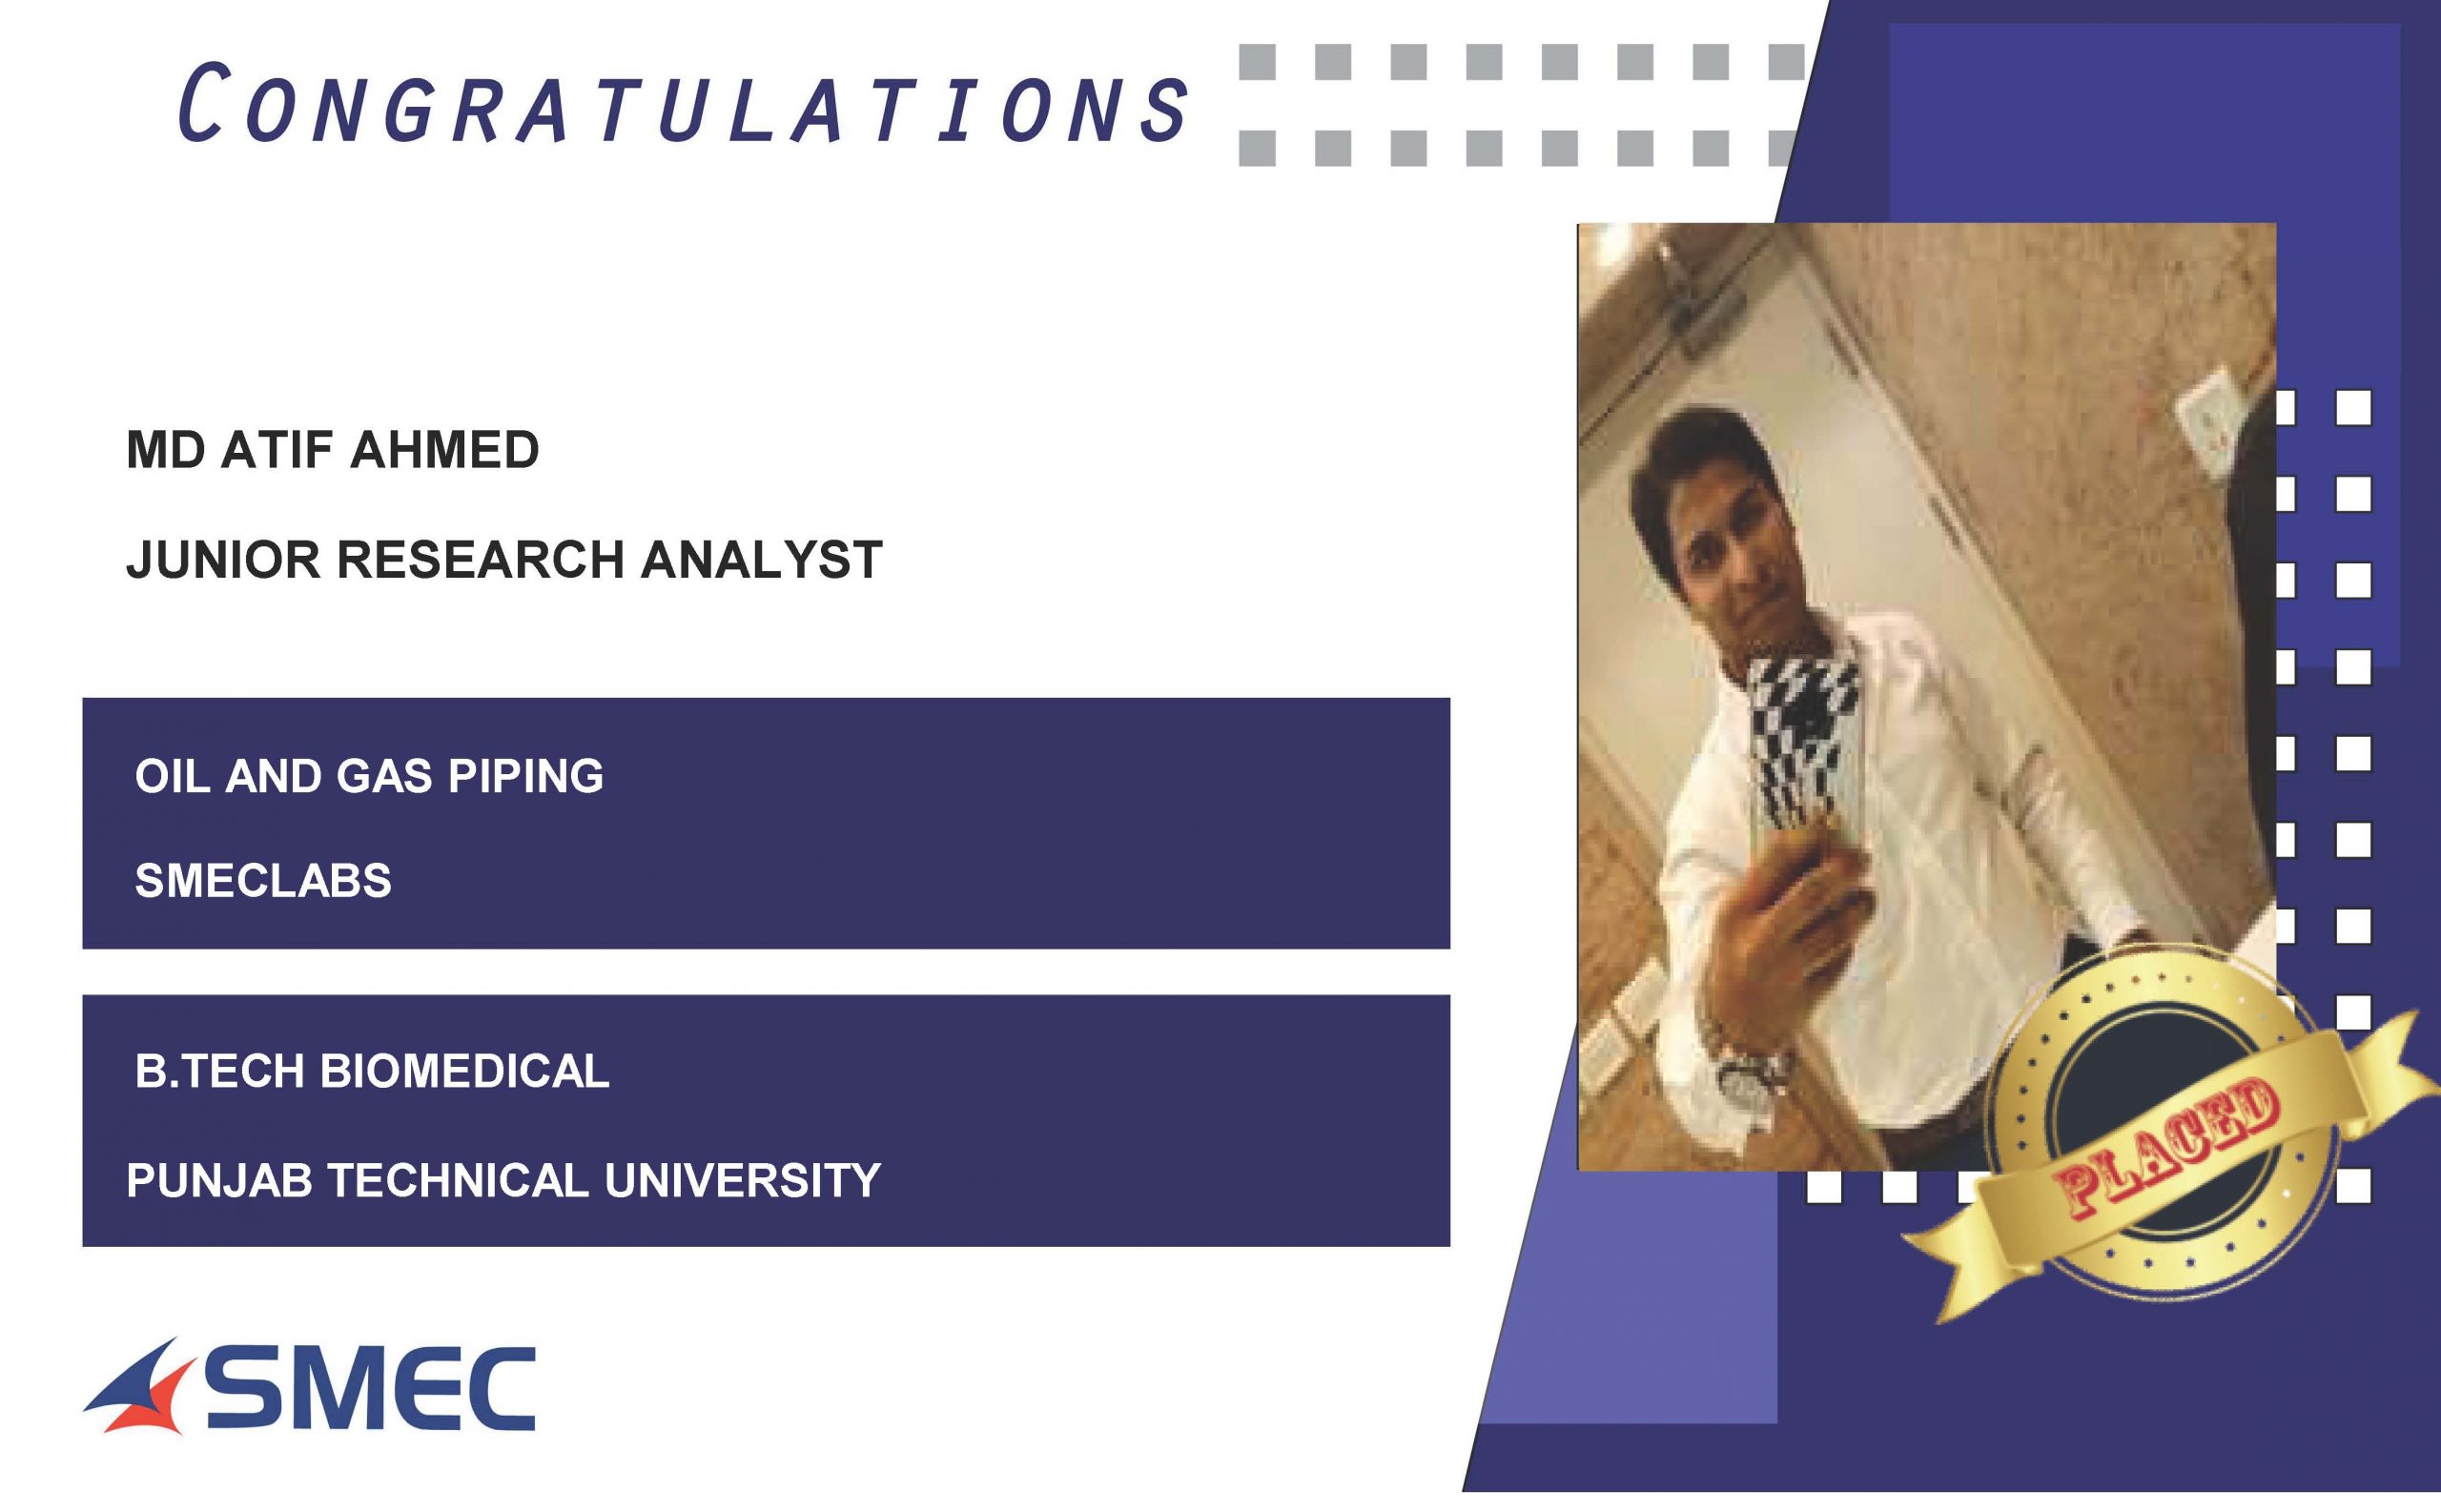 MD Atif Ahamed Placed as Junior Research Analyst